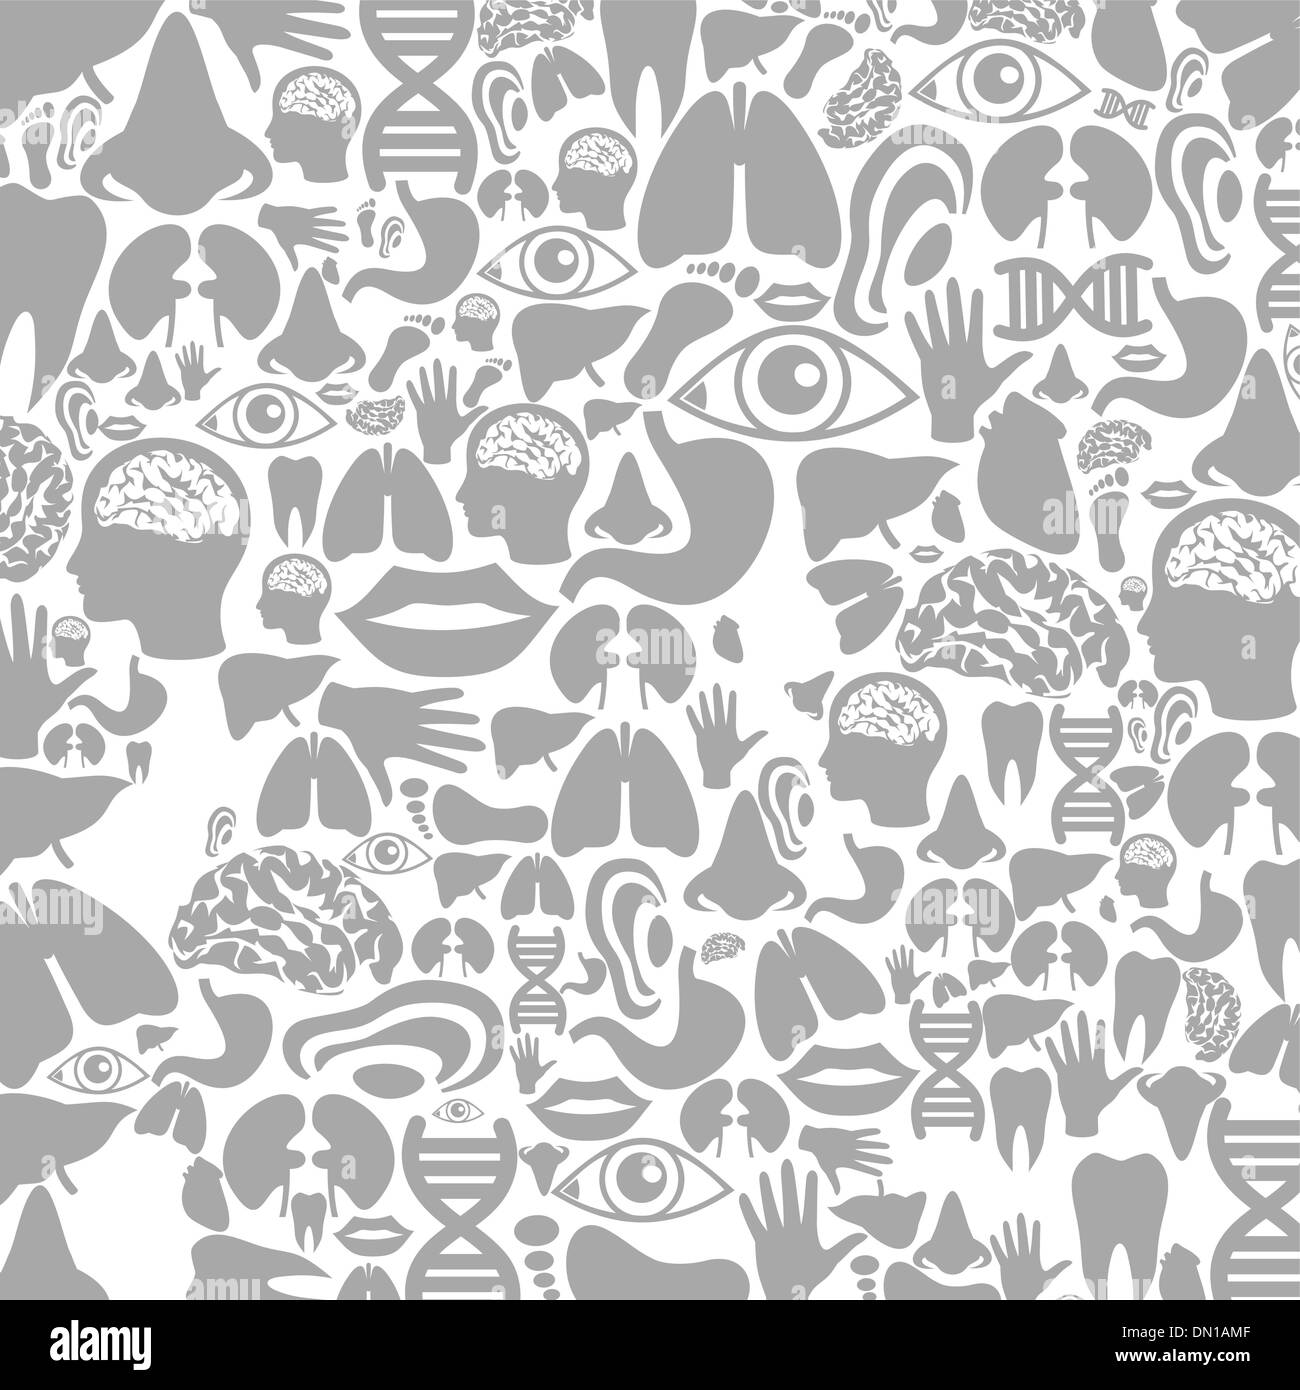 Background of a part of a body2 Stock Vector